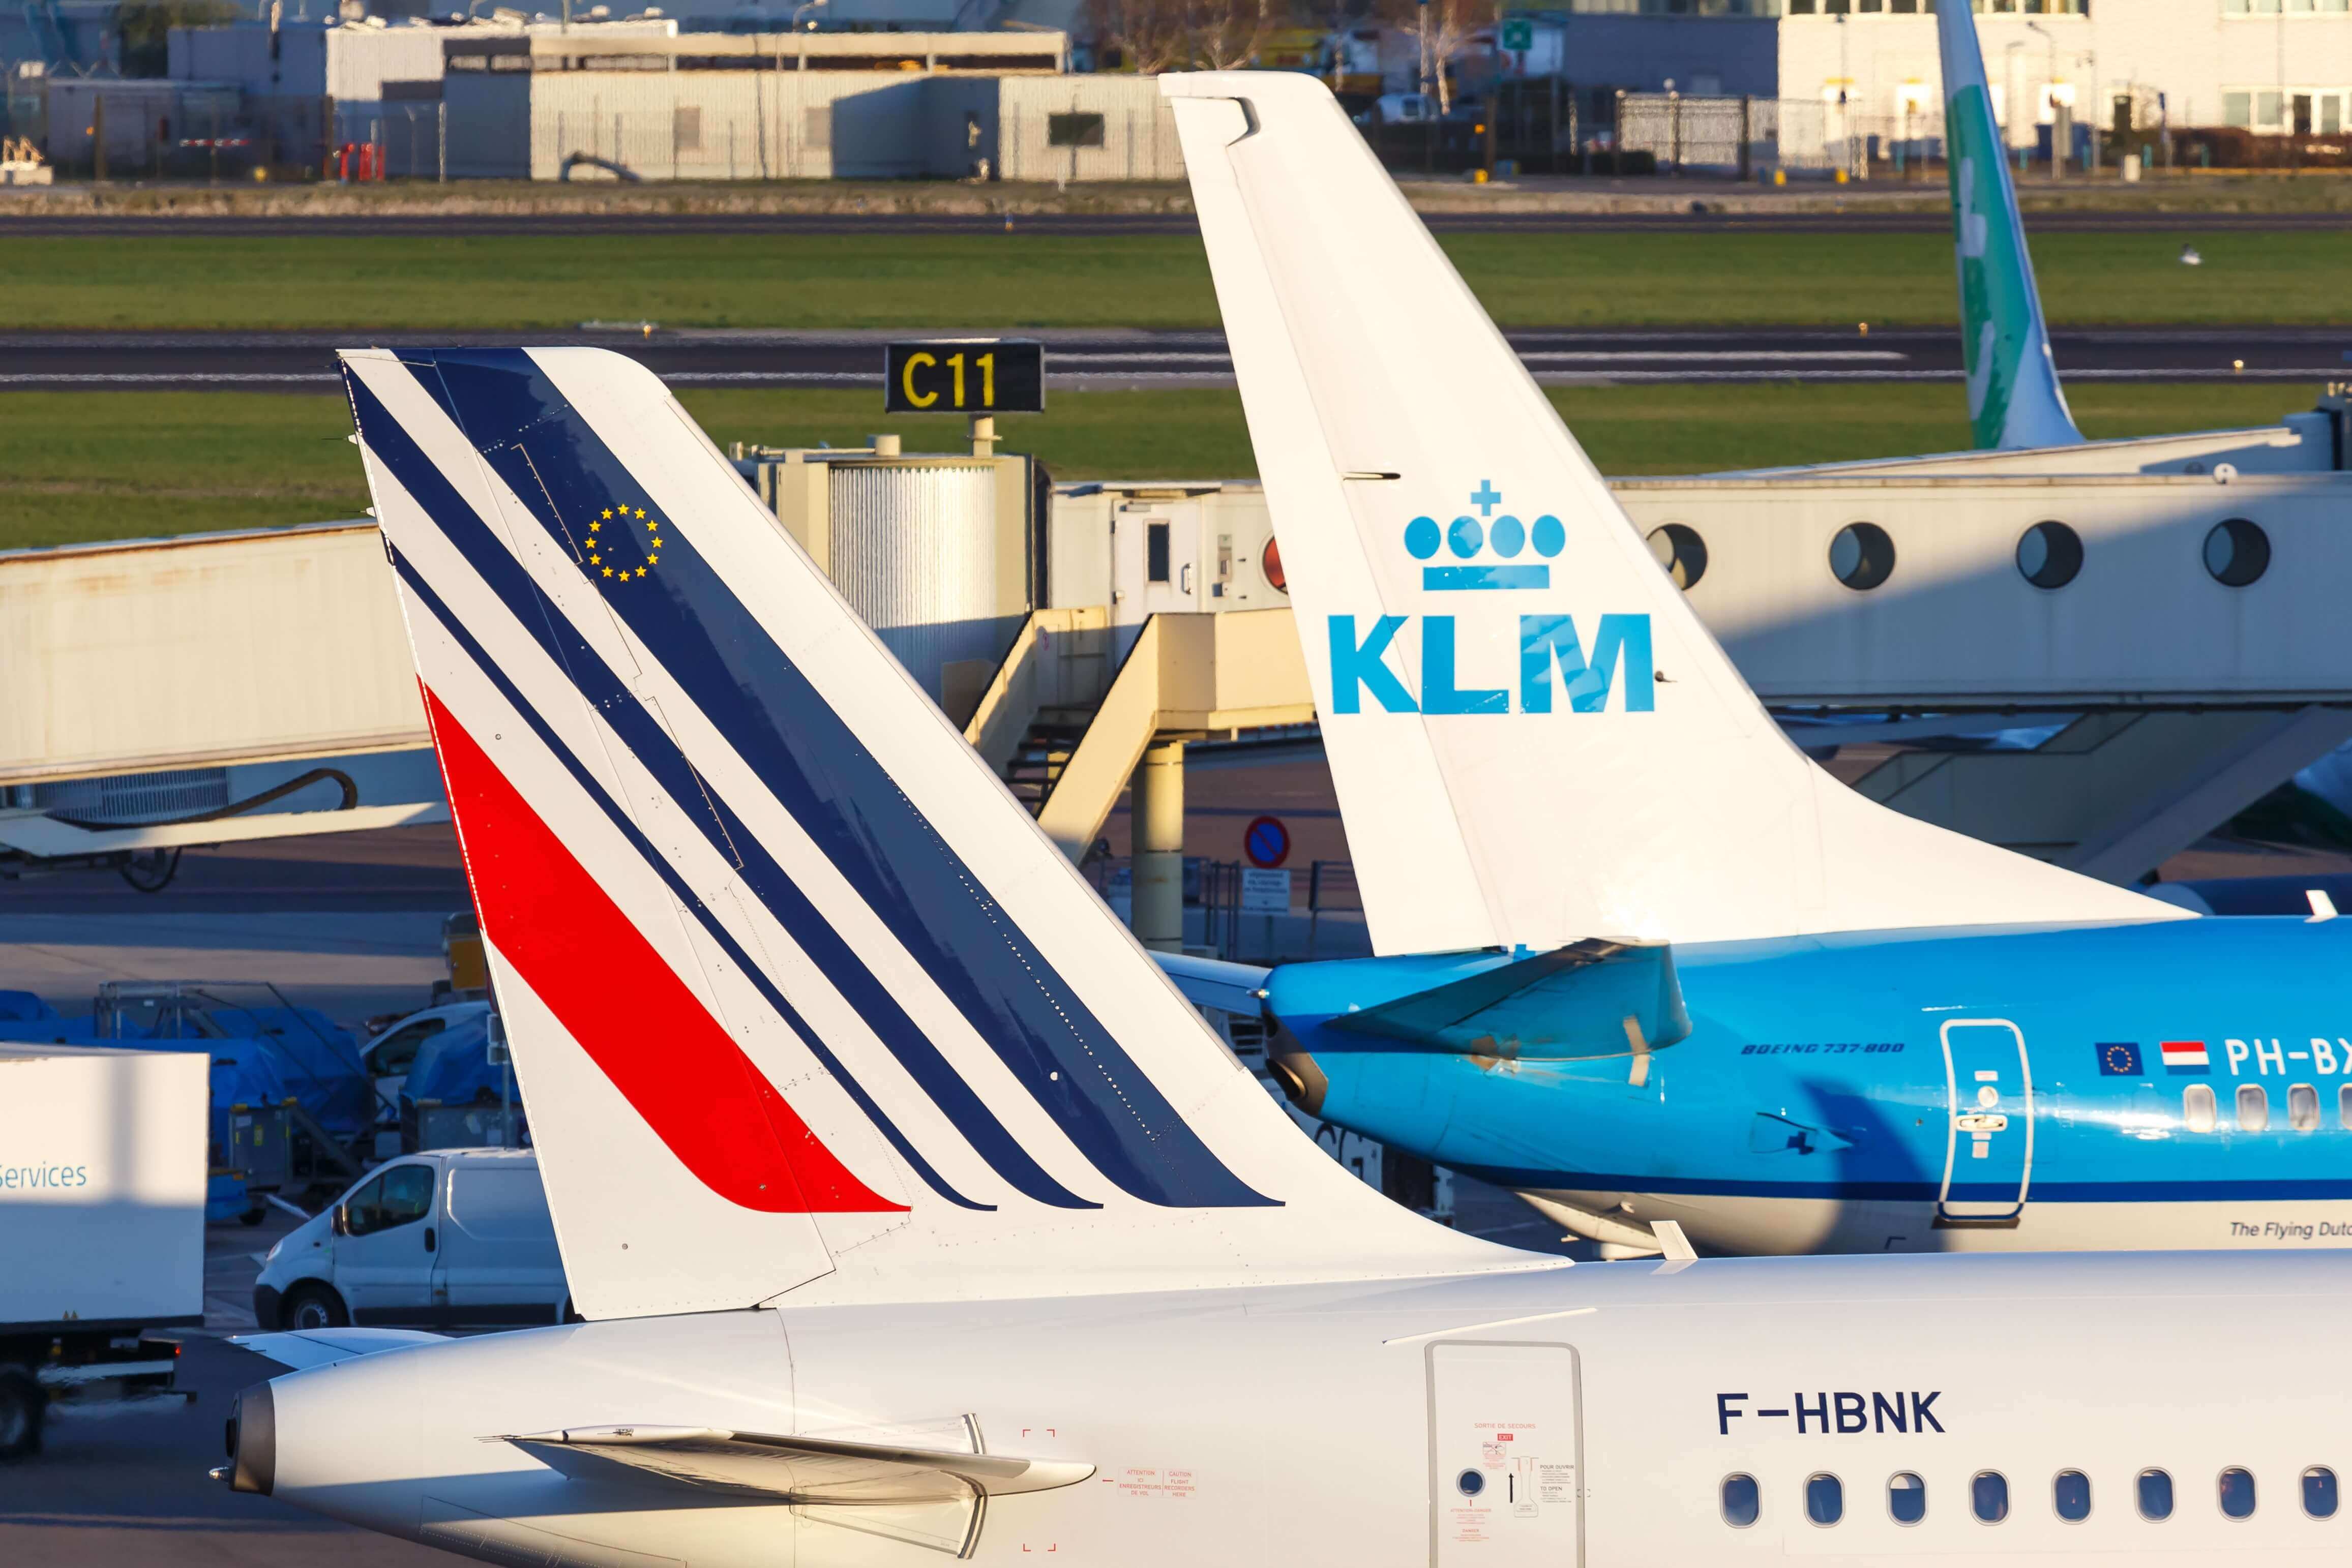 Years After The Air France KLM Merger